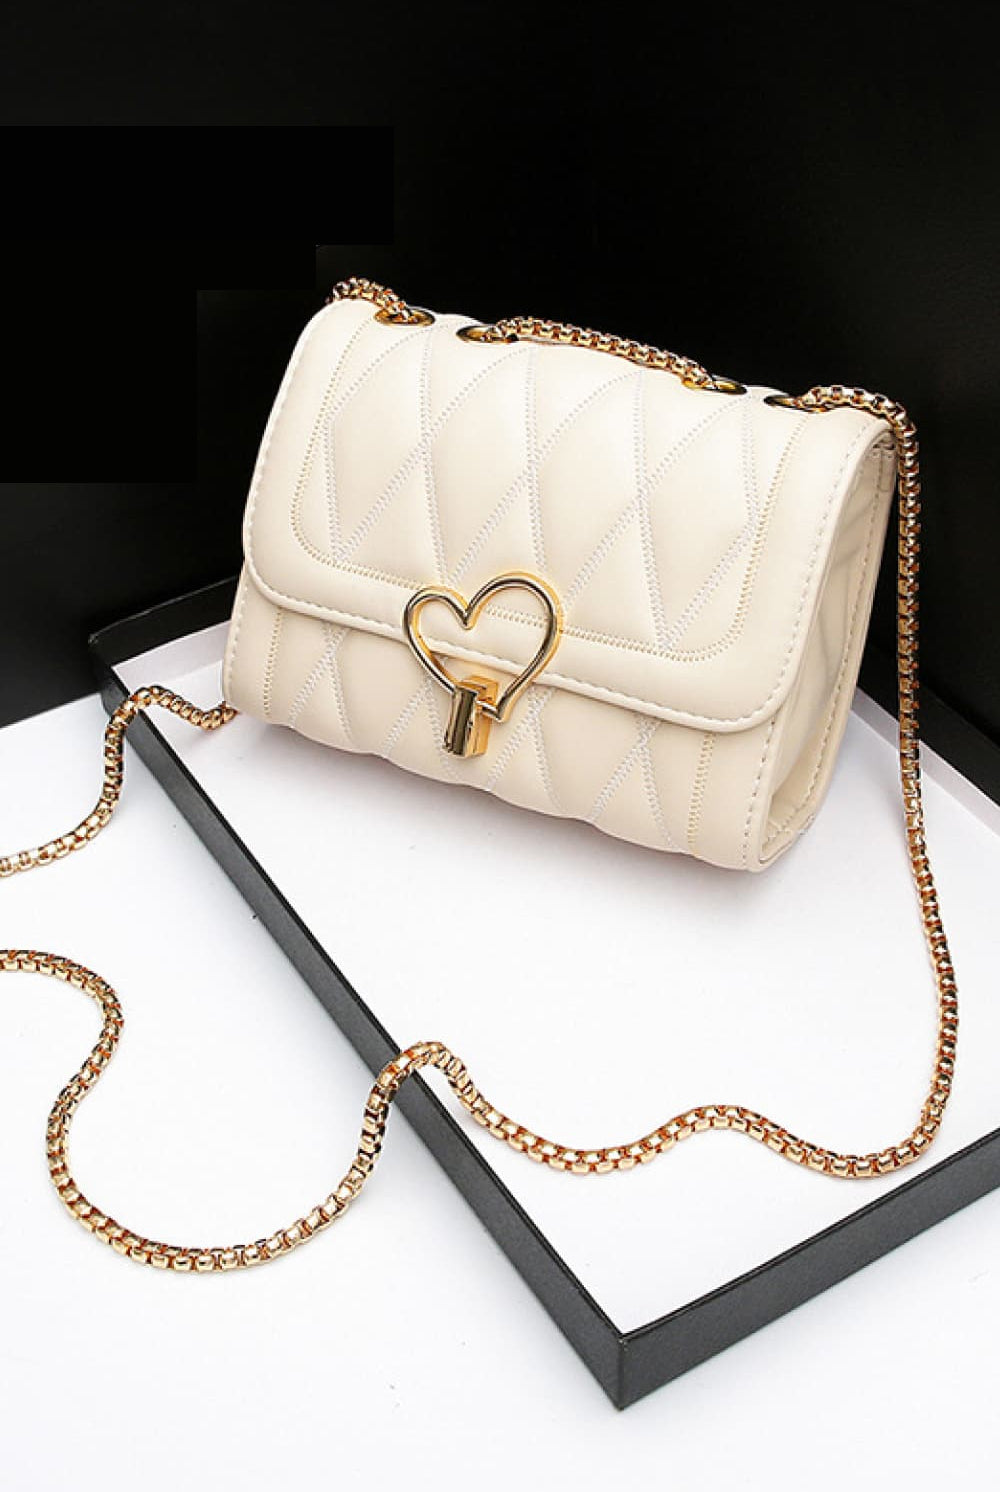 Antique White Her Style Heart Buckle PU Leather Crossbody Bag Handbags